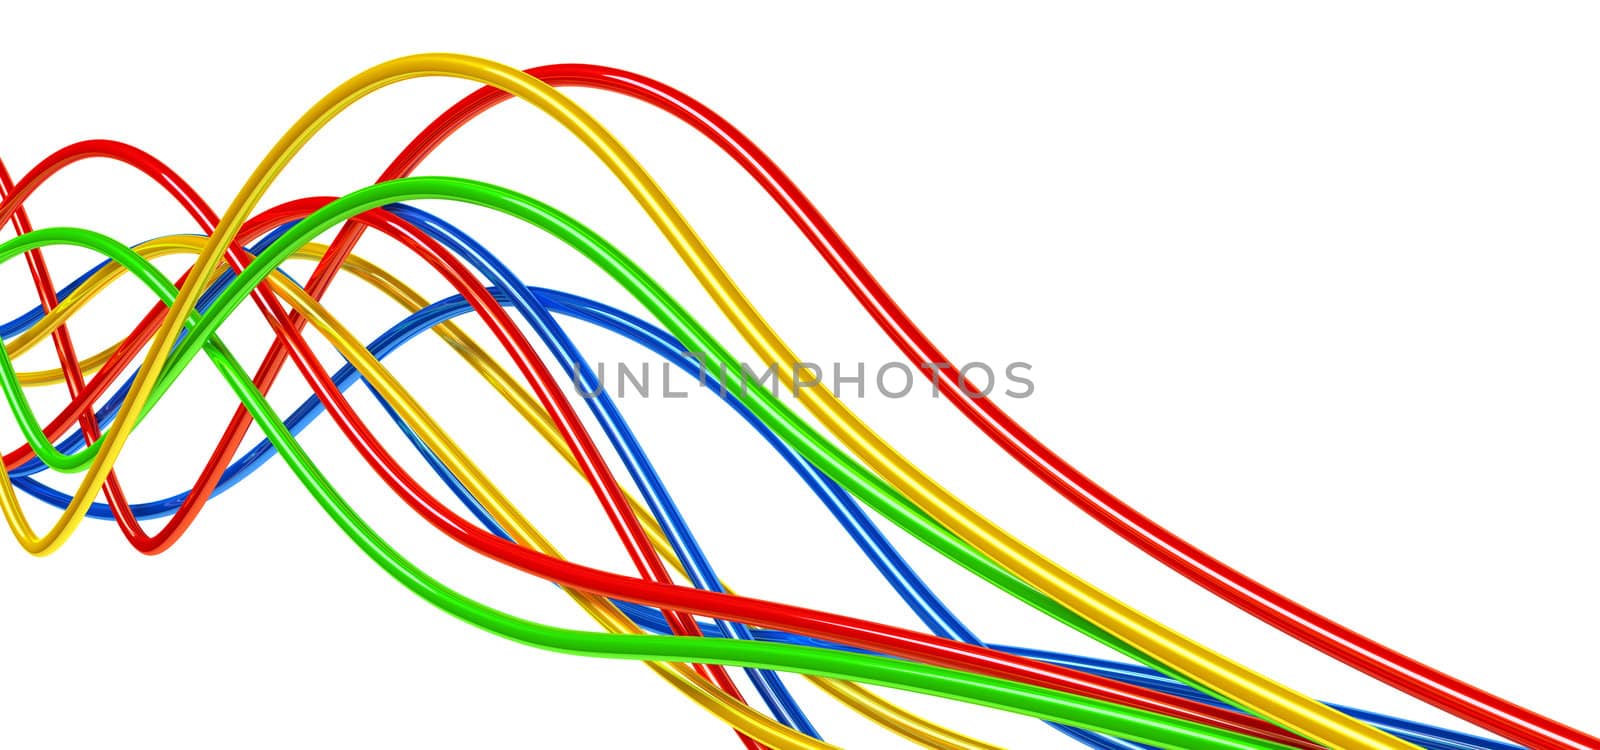 fibre-optical varicolored cables on a white background